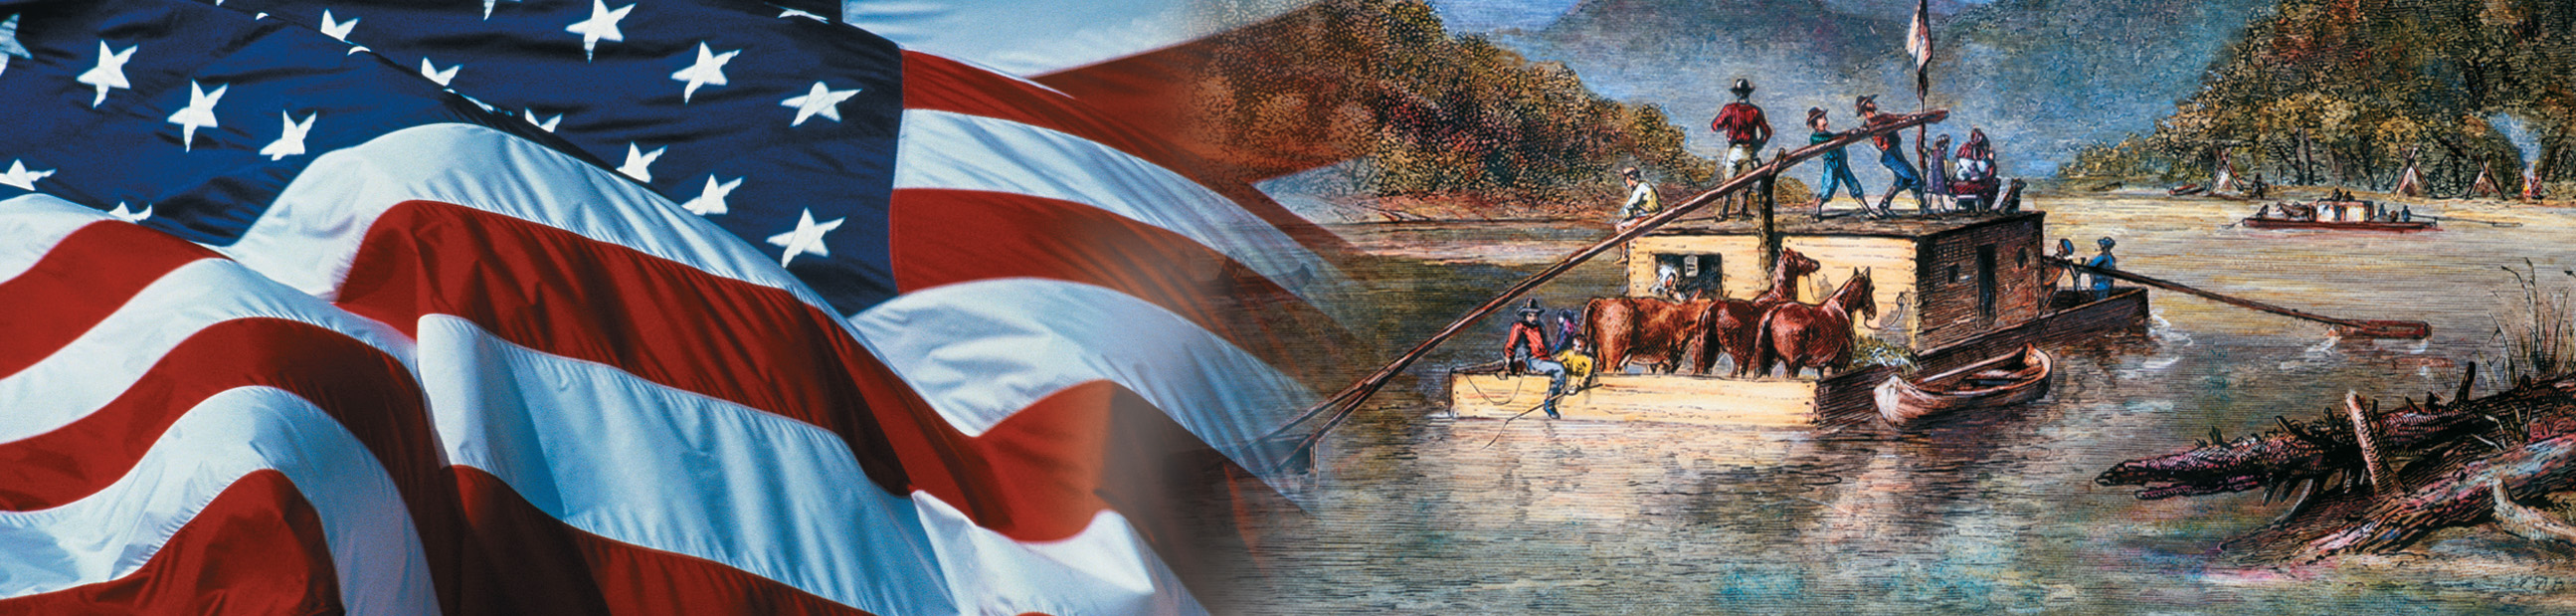 Banner: a U.S. flag and a painting of people steering a barge on a river.